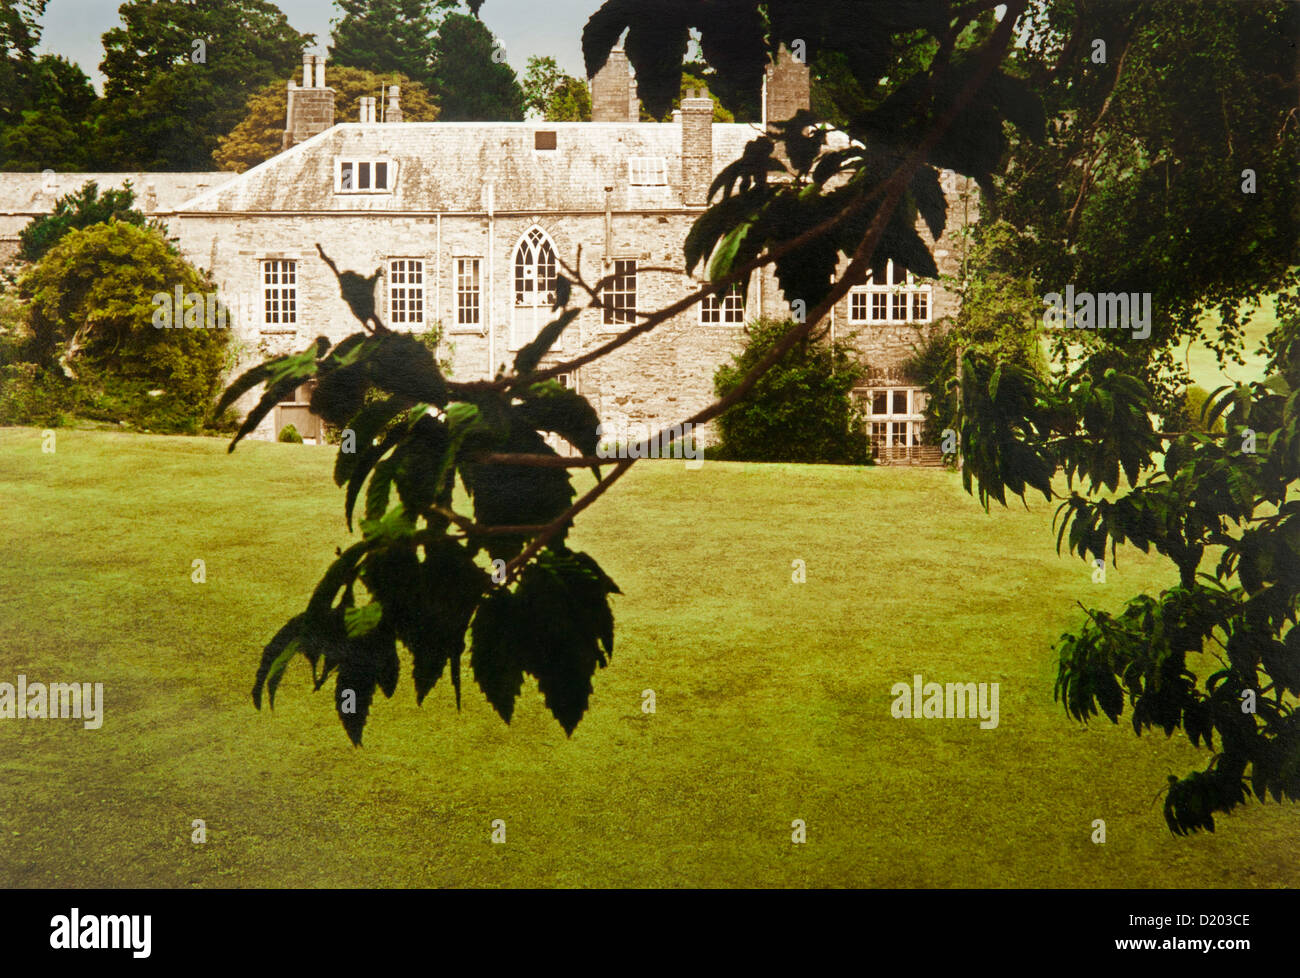 View of manor house Prideaux Place, Padstow, Devon, Southern England, Great Britain, Europe Stock Photo